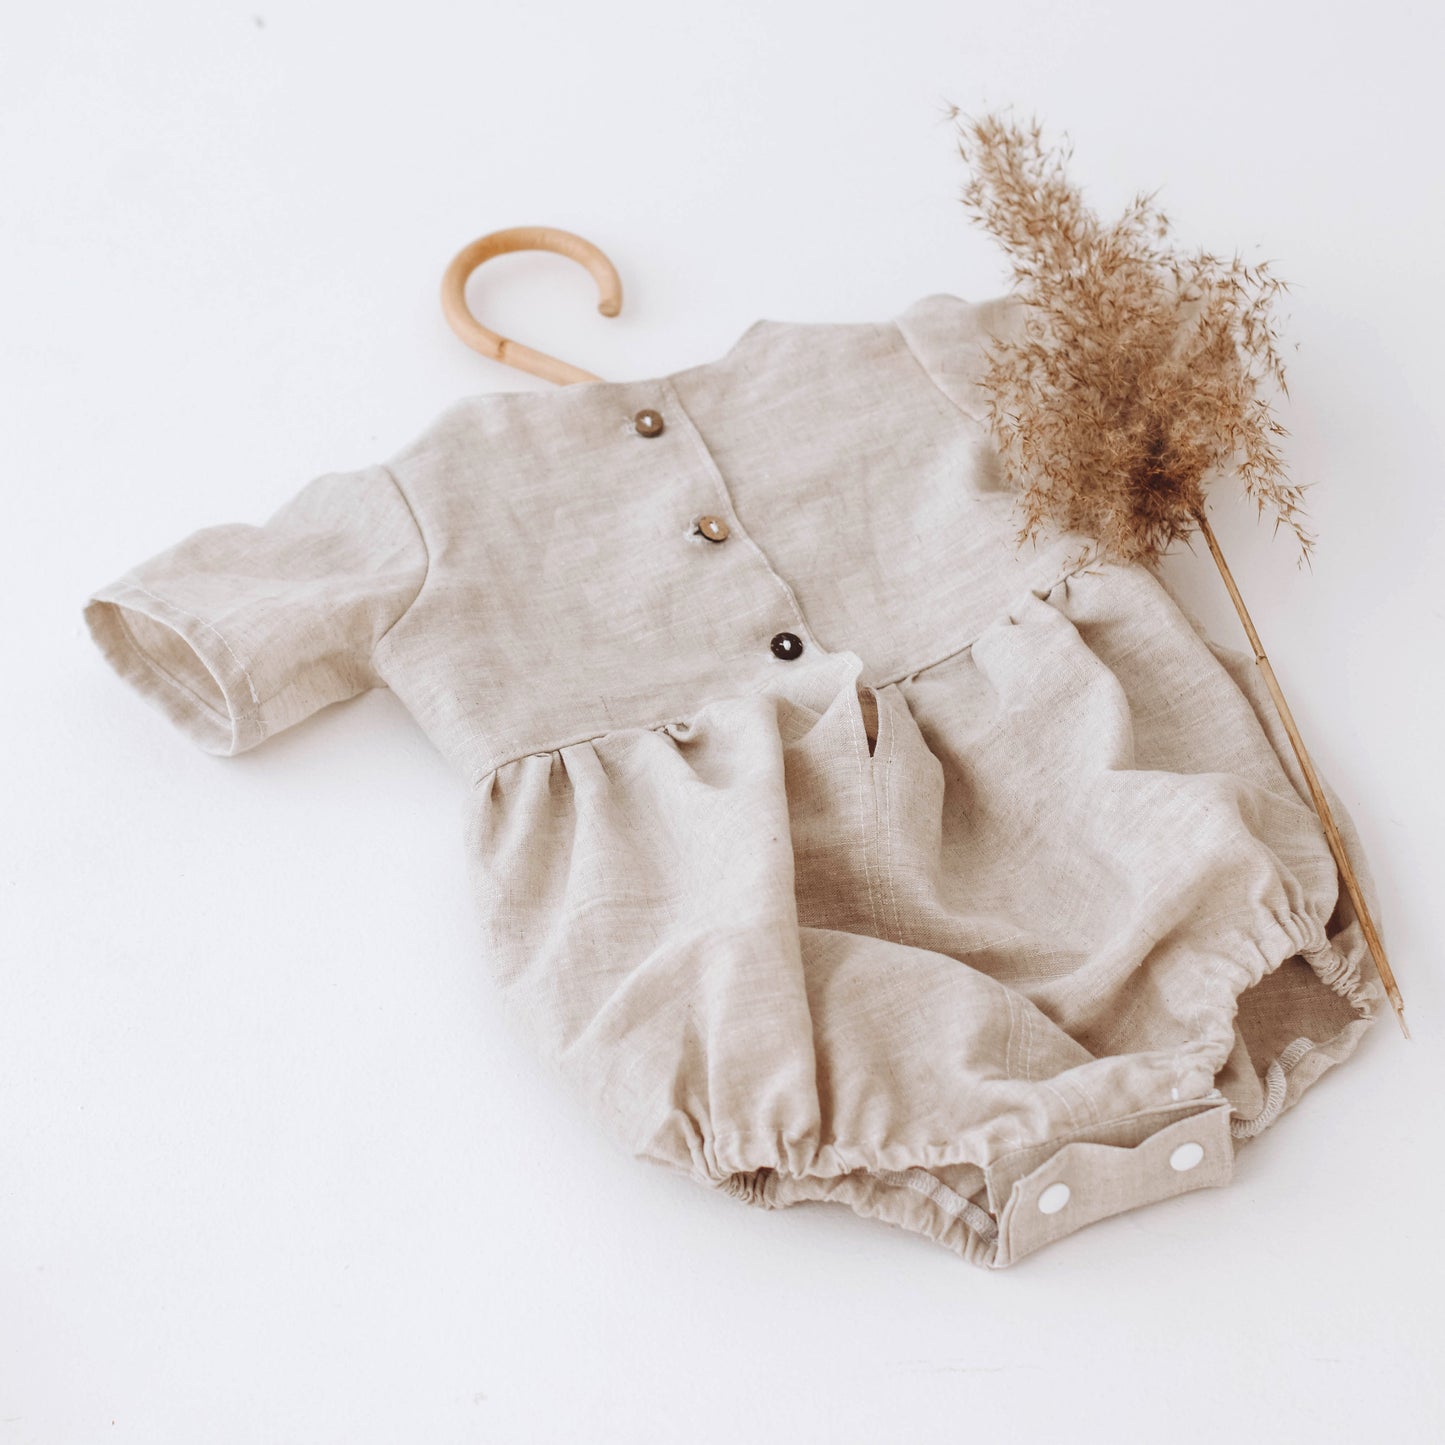 Linen romper with short sleeves